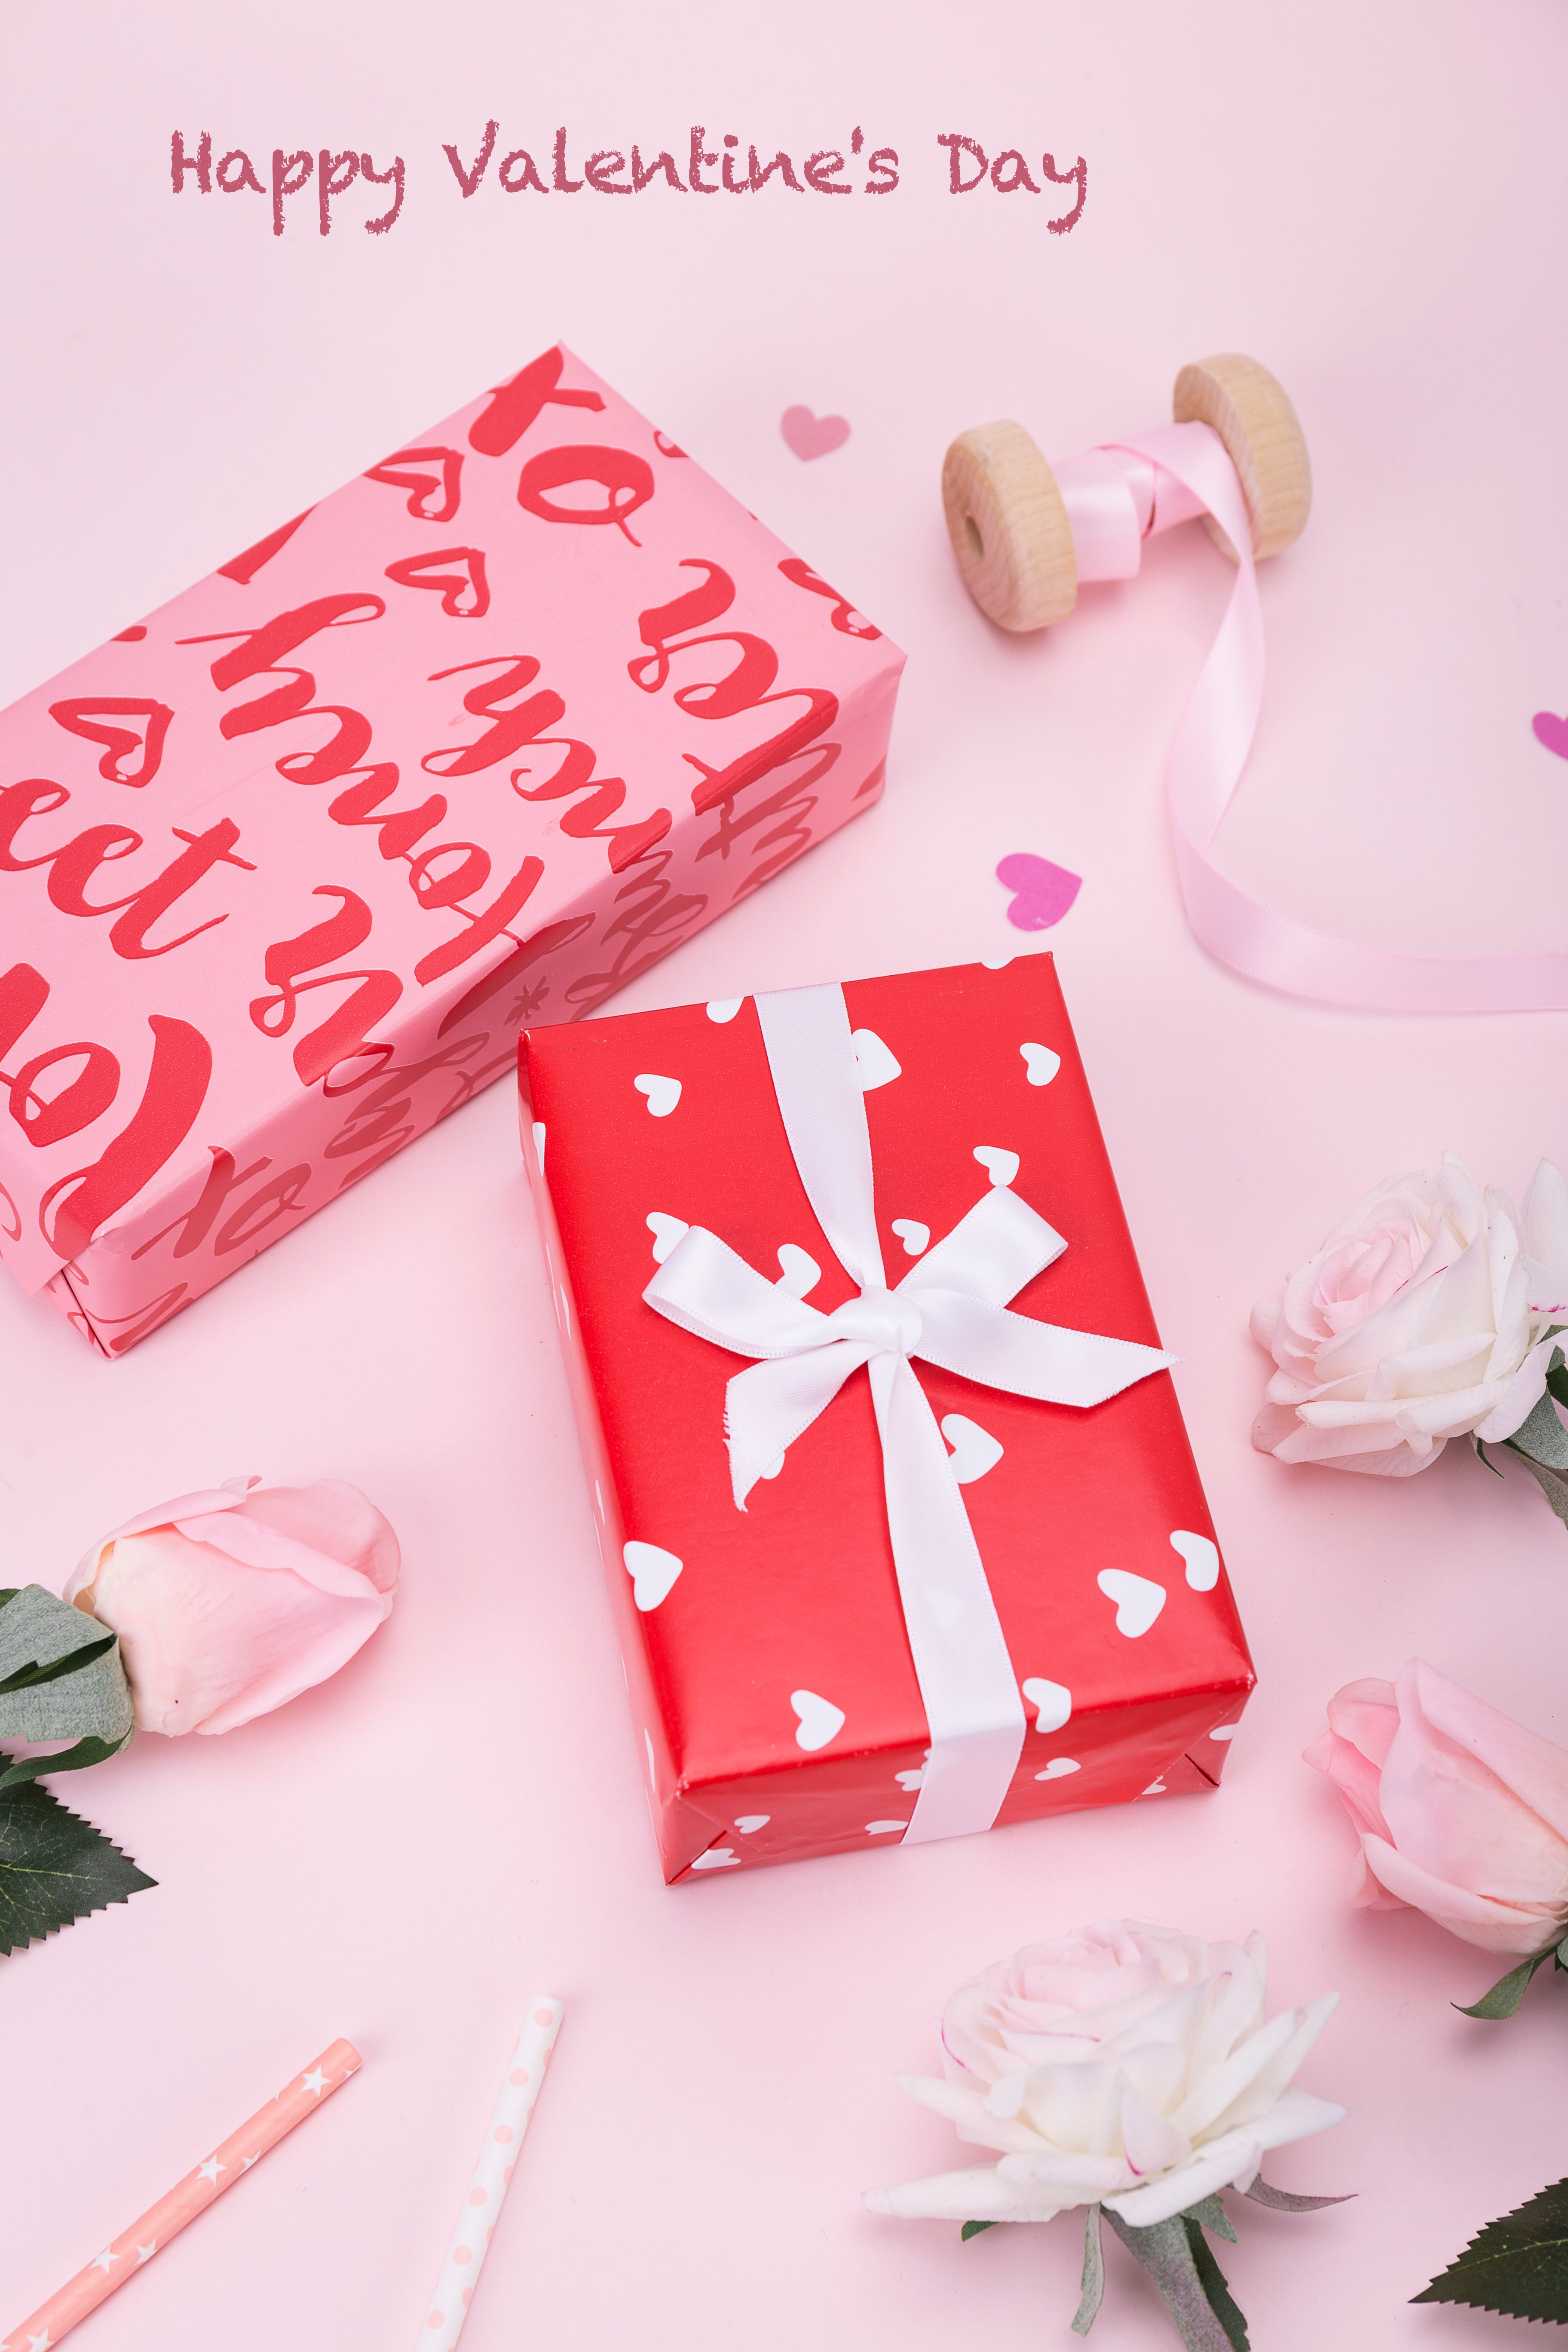 Valentine's Day Wrapping Paper Bundle Pink/Red - 4 Rolls/30 inch X 120 inch Per Roll